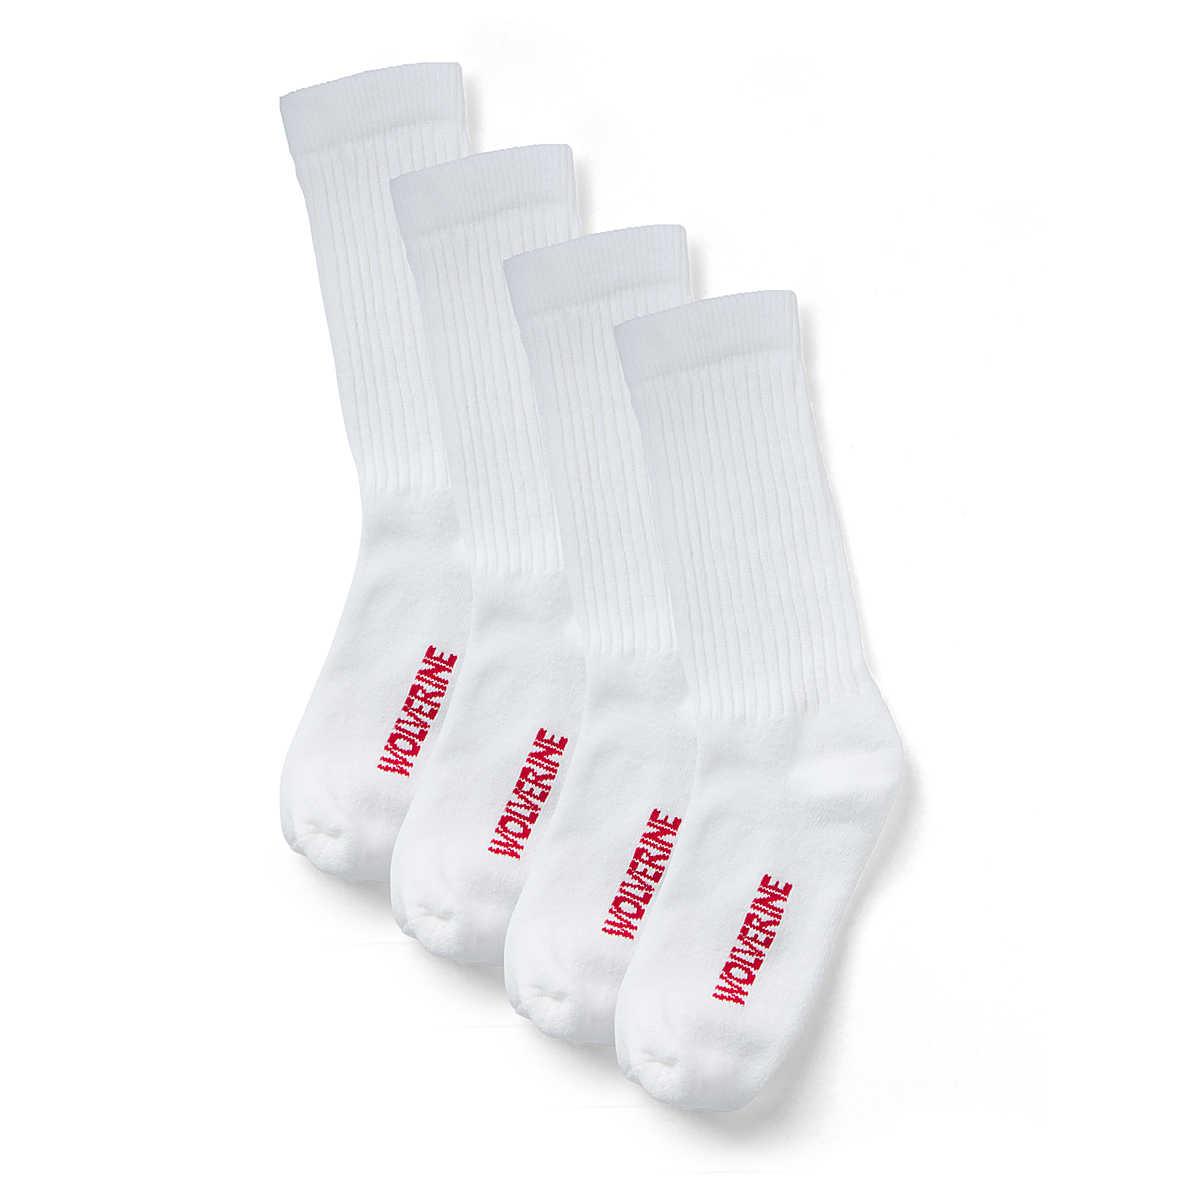 Men's 4-Pack Full Cushion Cotton Crew Sock - White - Purpose-Built / Home of the Trades